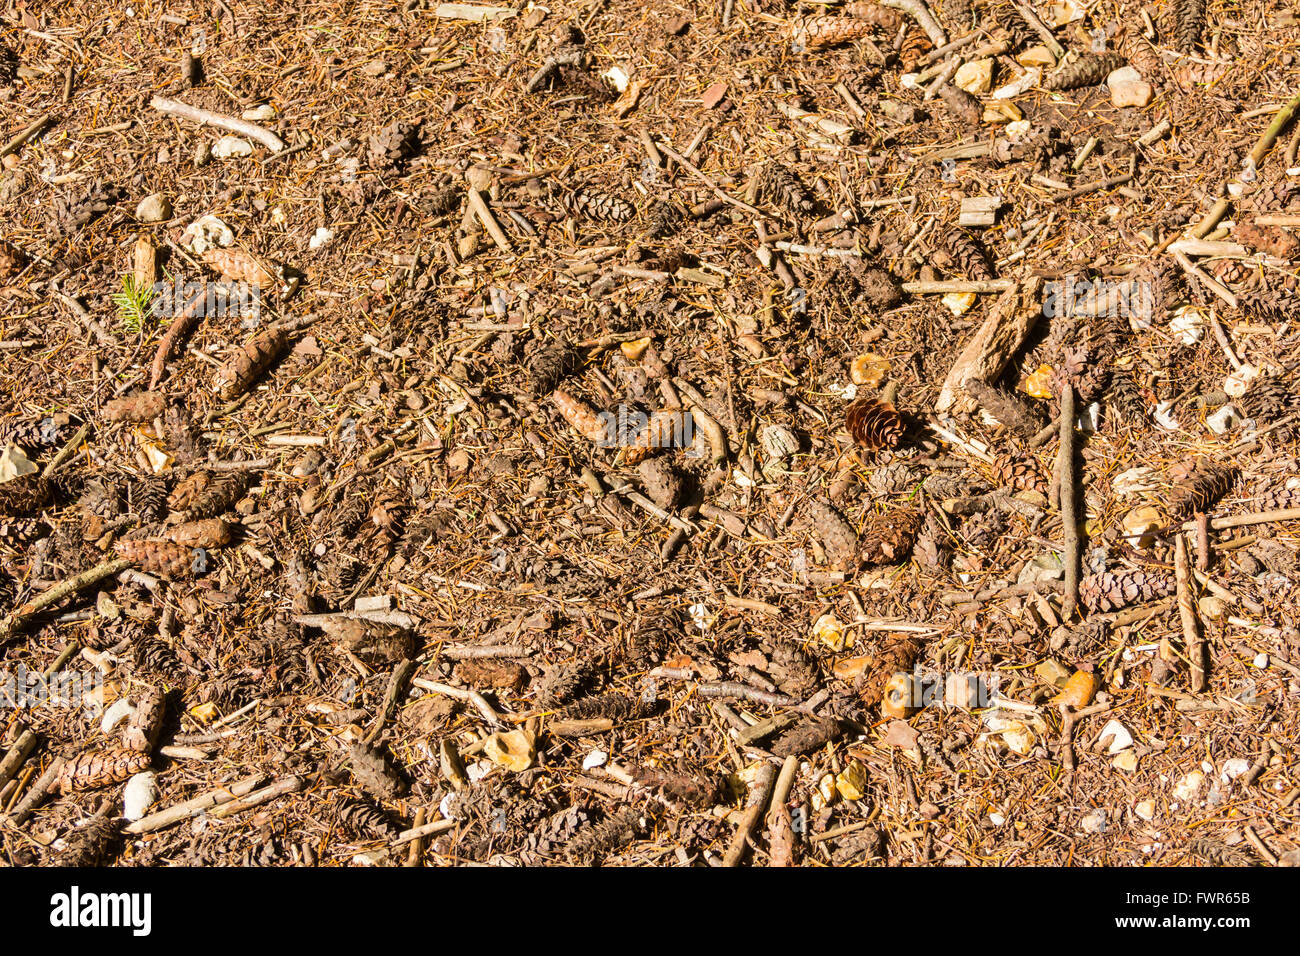 Full frame of the ground in a conifer forest in the UK. brown leaf and conifer needle litter, alongside fir cones and twigs. Stock Photo